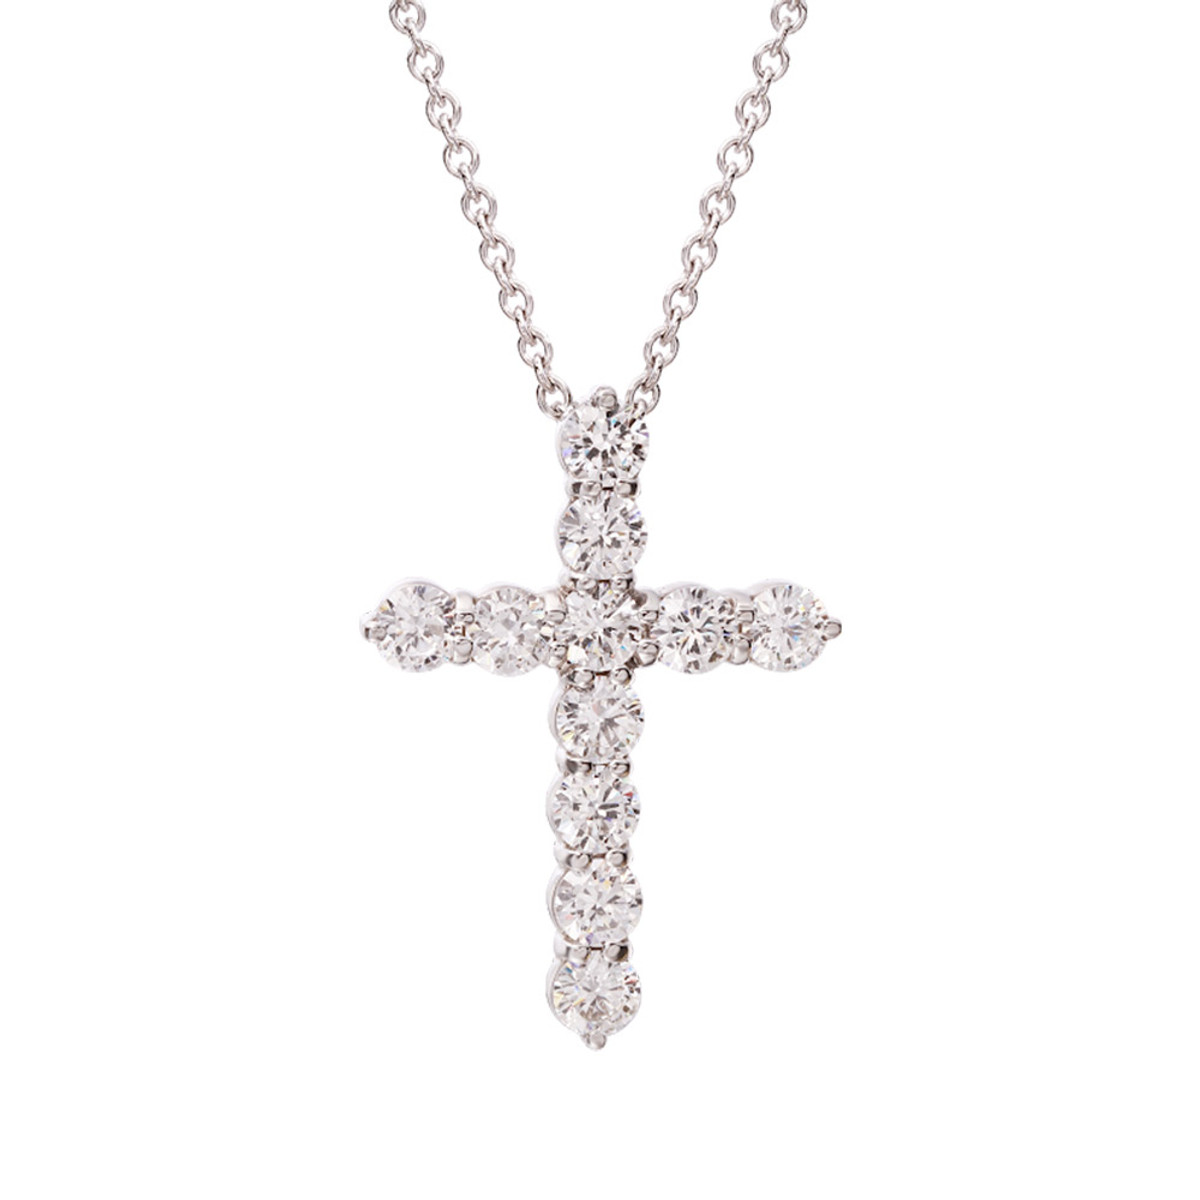 Hyde Park Collection 18K White Gold 11-Diamond Cross Necklace Product Image